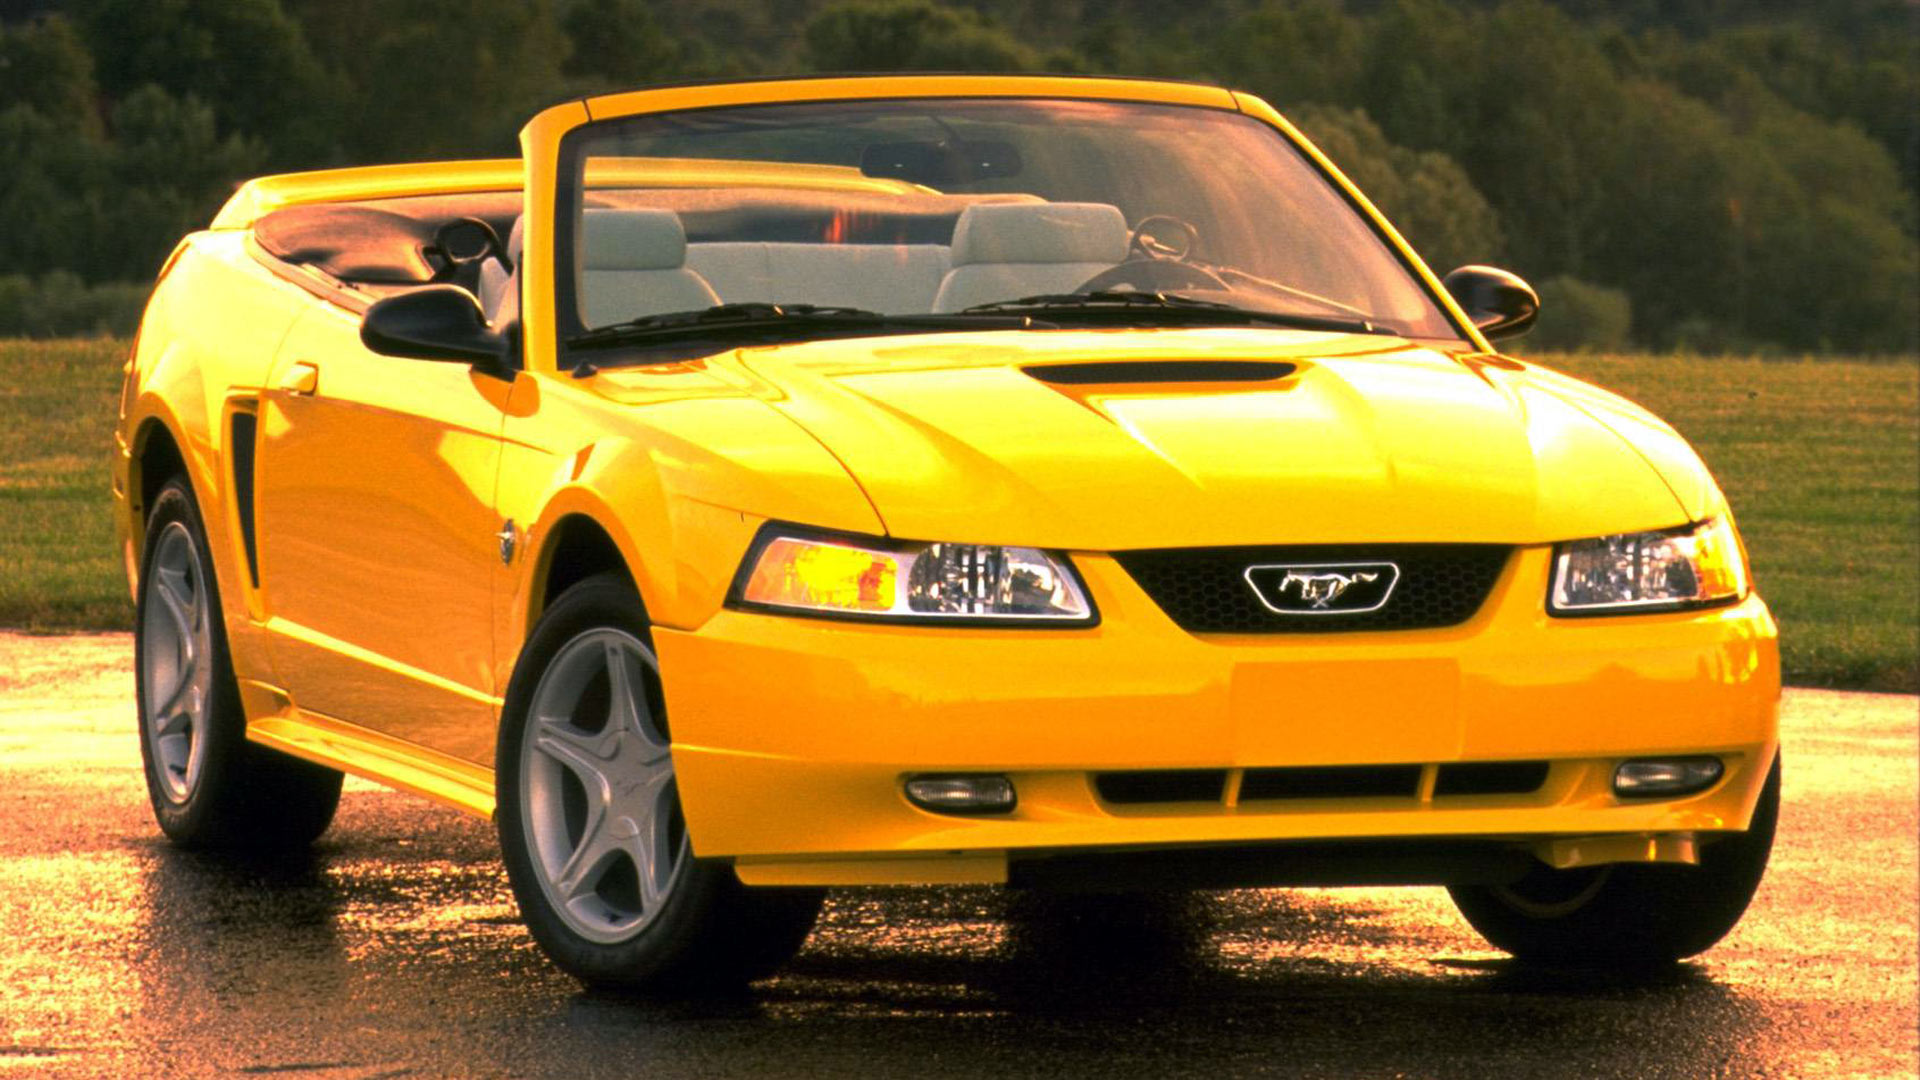 35th anniversary of the Ford Mustang